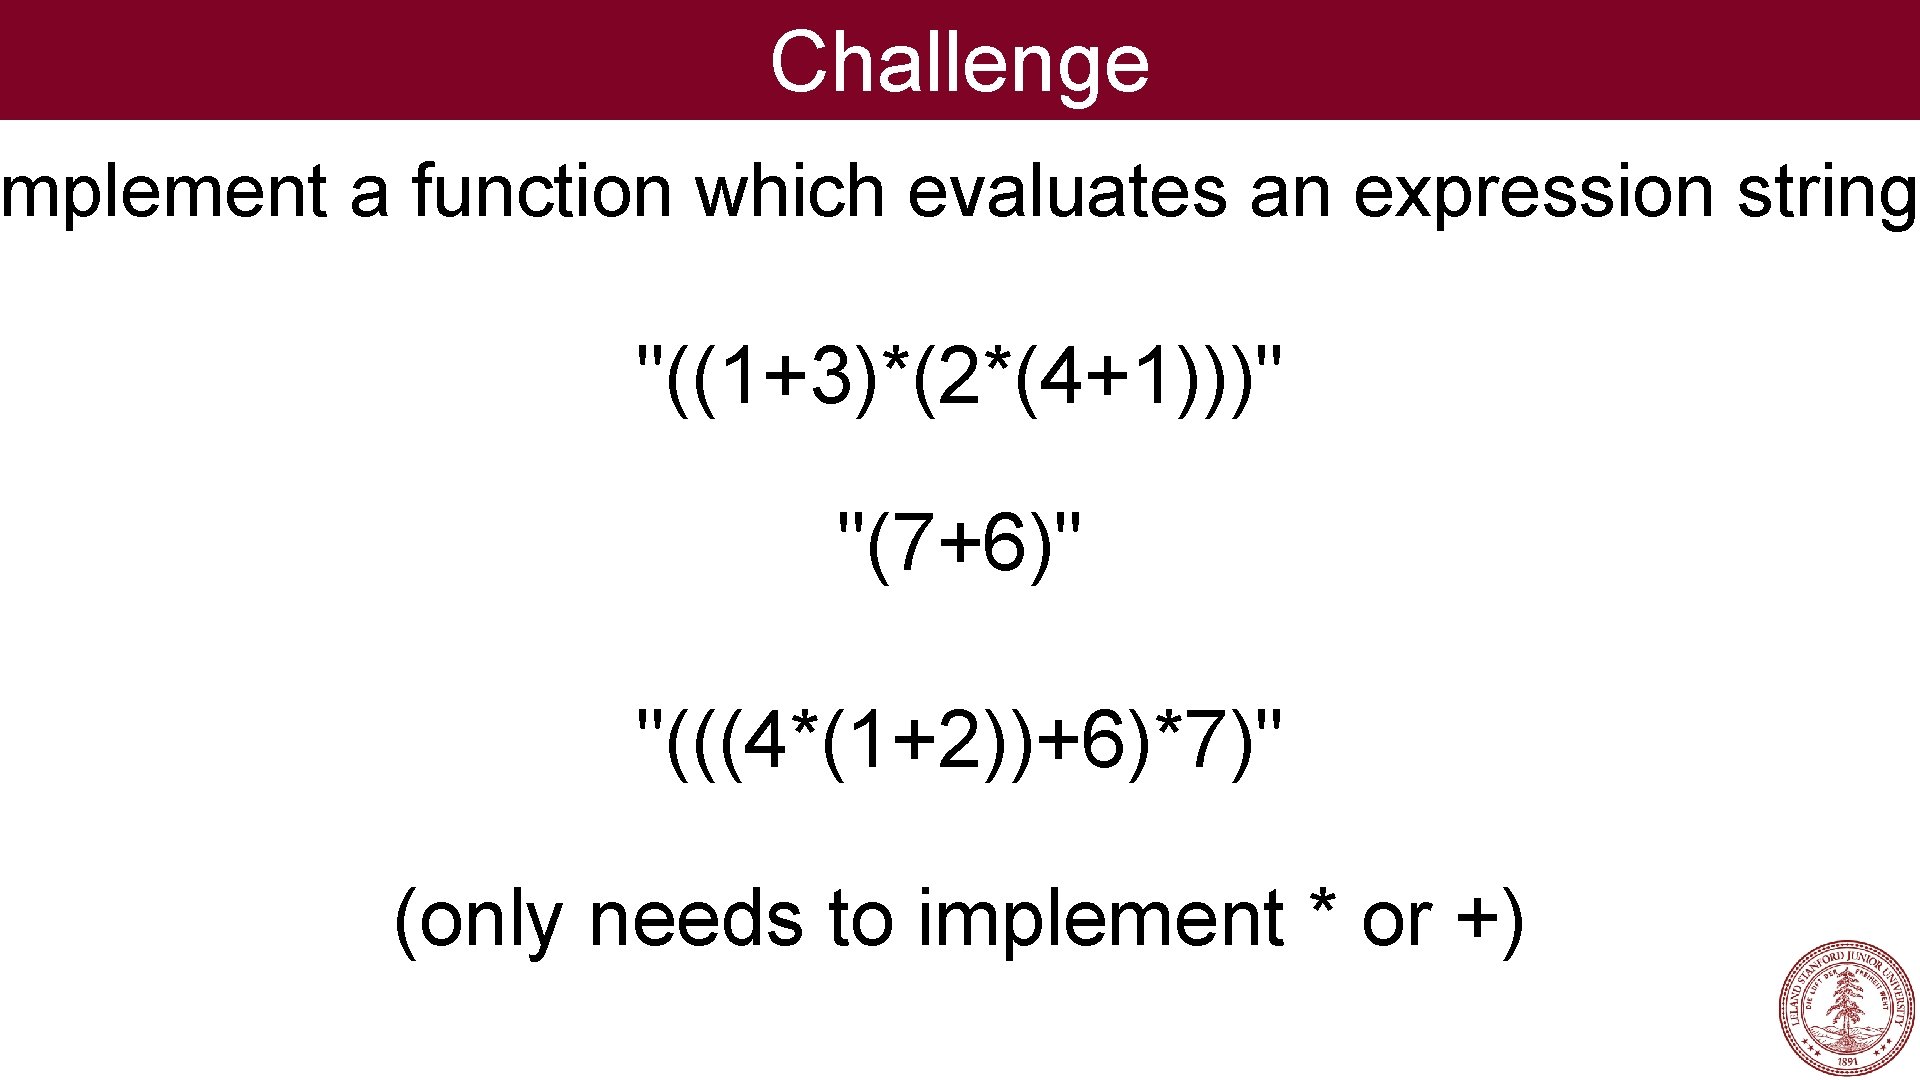 Challenge mplement a function which evaluates an expression string: "((1+3)*(2*(4+1)))" "(7+6)" "(((4*(1+2))+6)*7)" (only needs